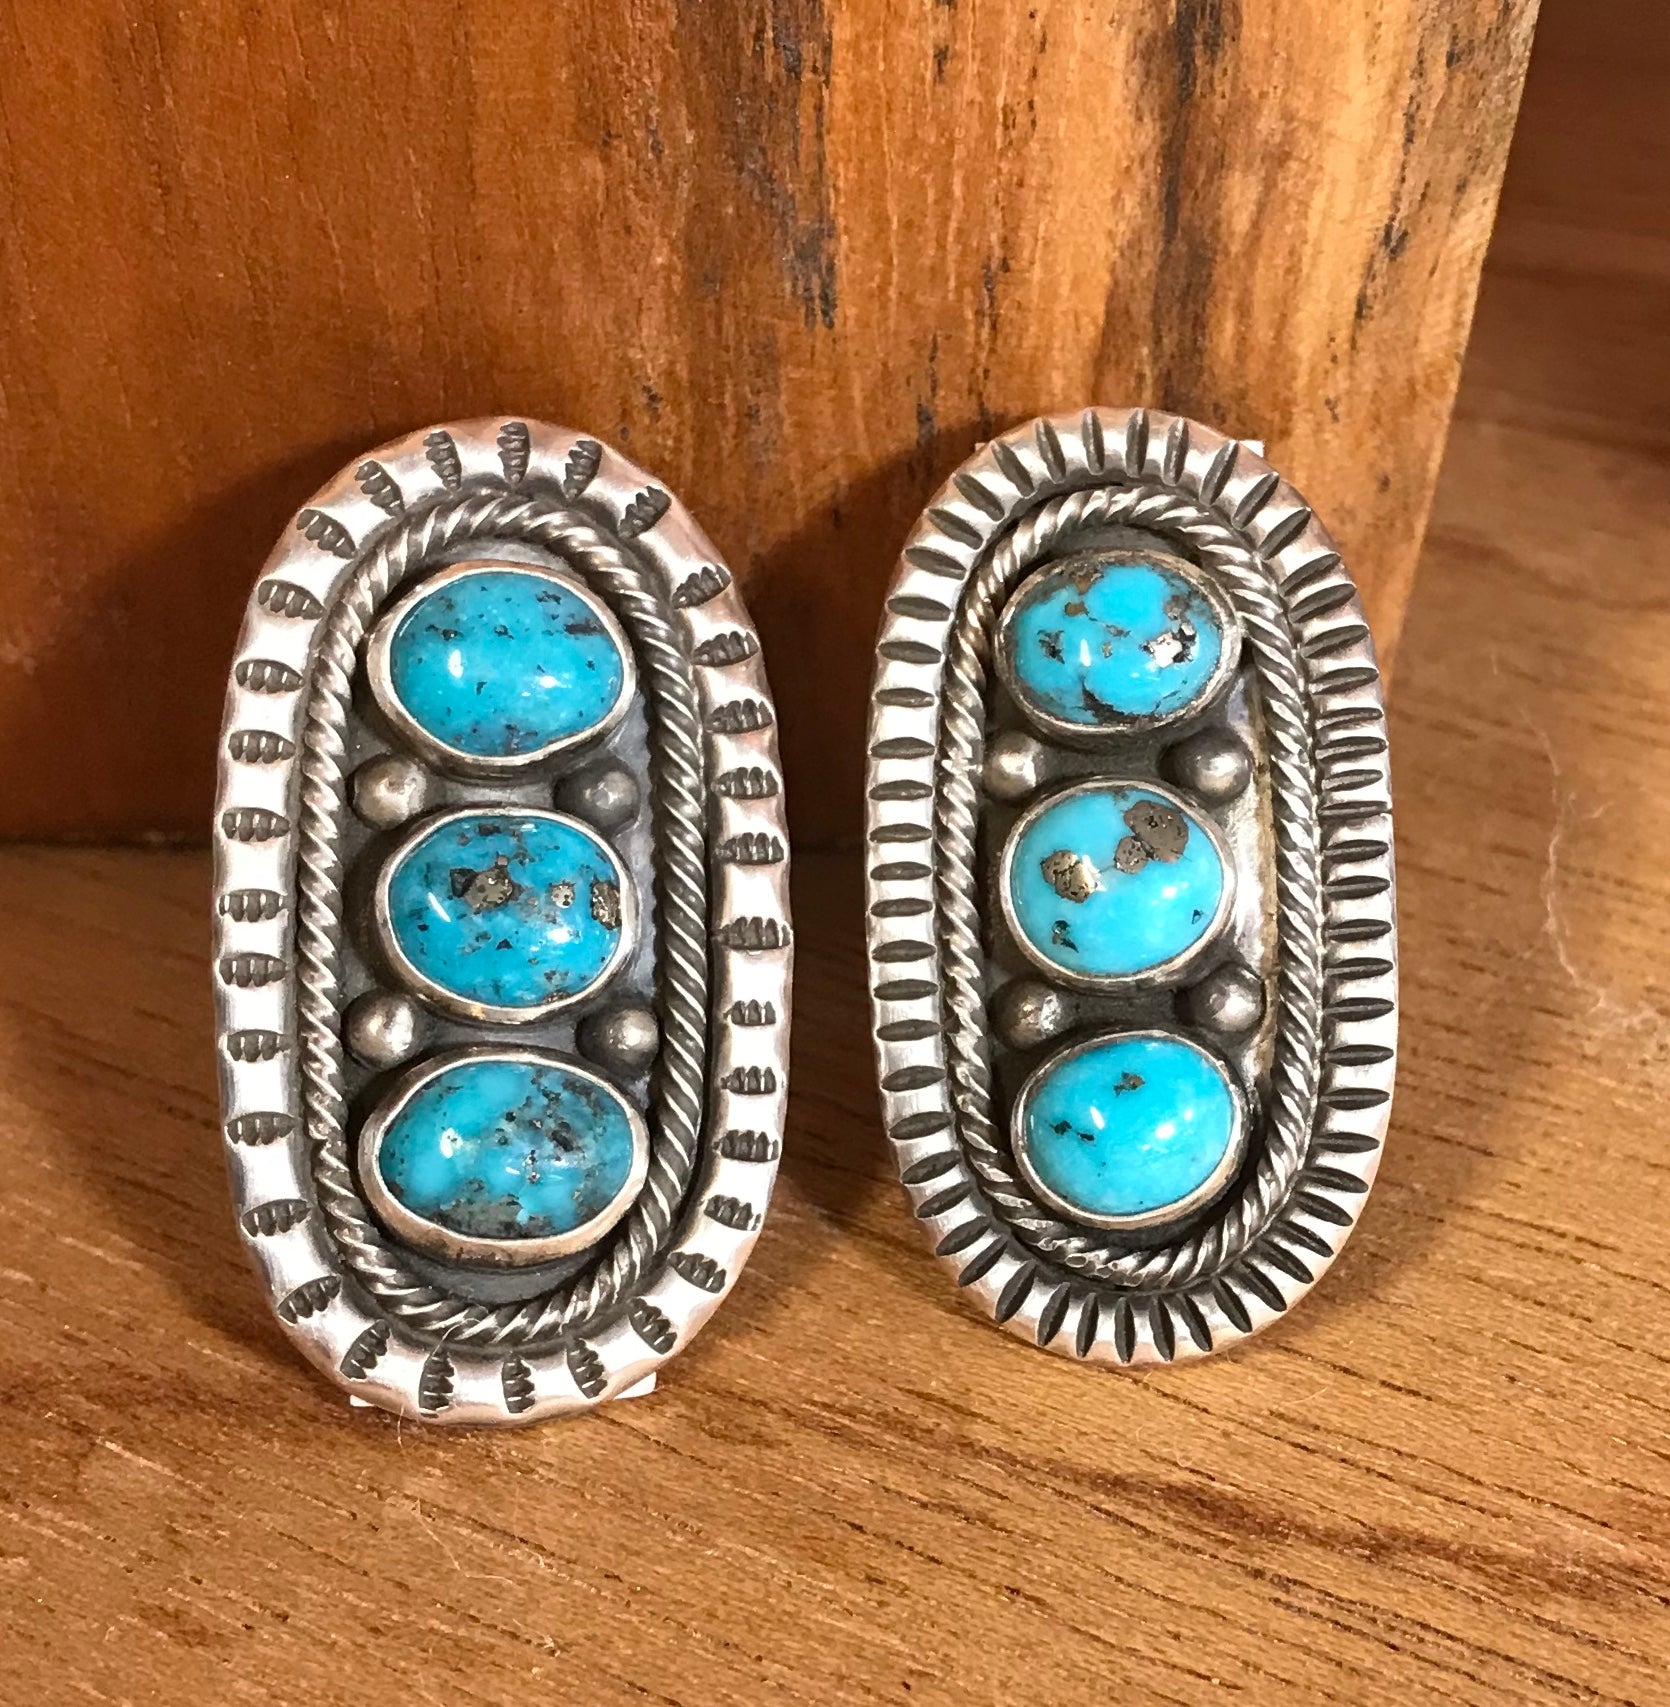 The Lonesome Turquoise Ring Signed By Arnold & Carleena Goodluck (Size 8)